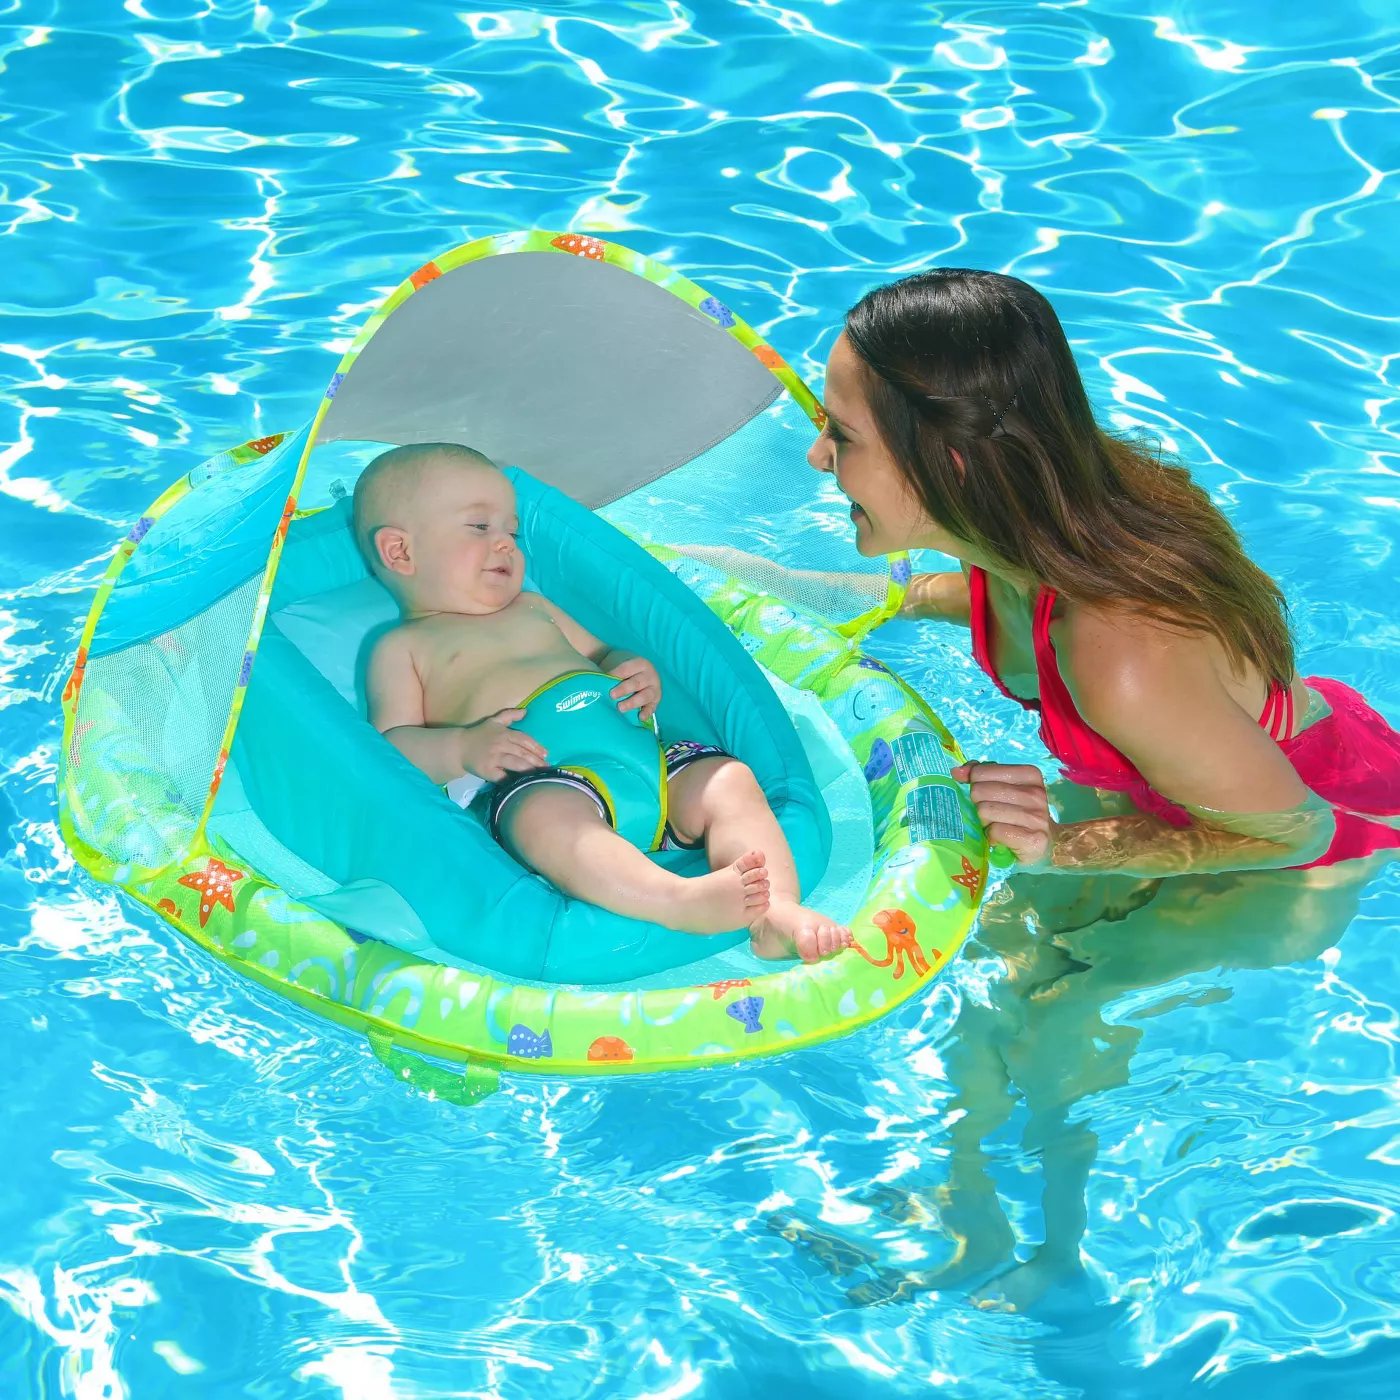 A baby model in a green- and teal-colored float with an adult model supervising